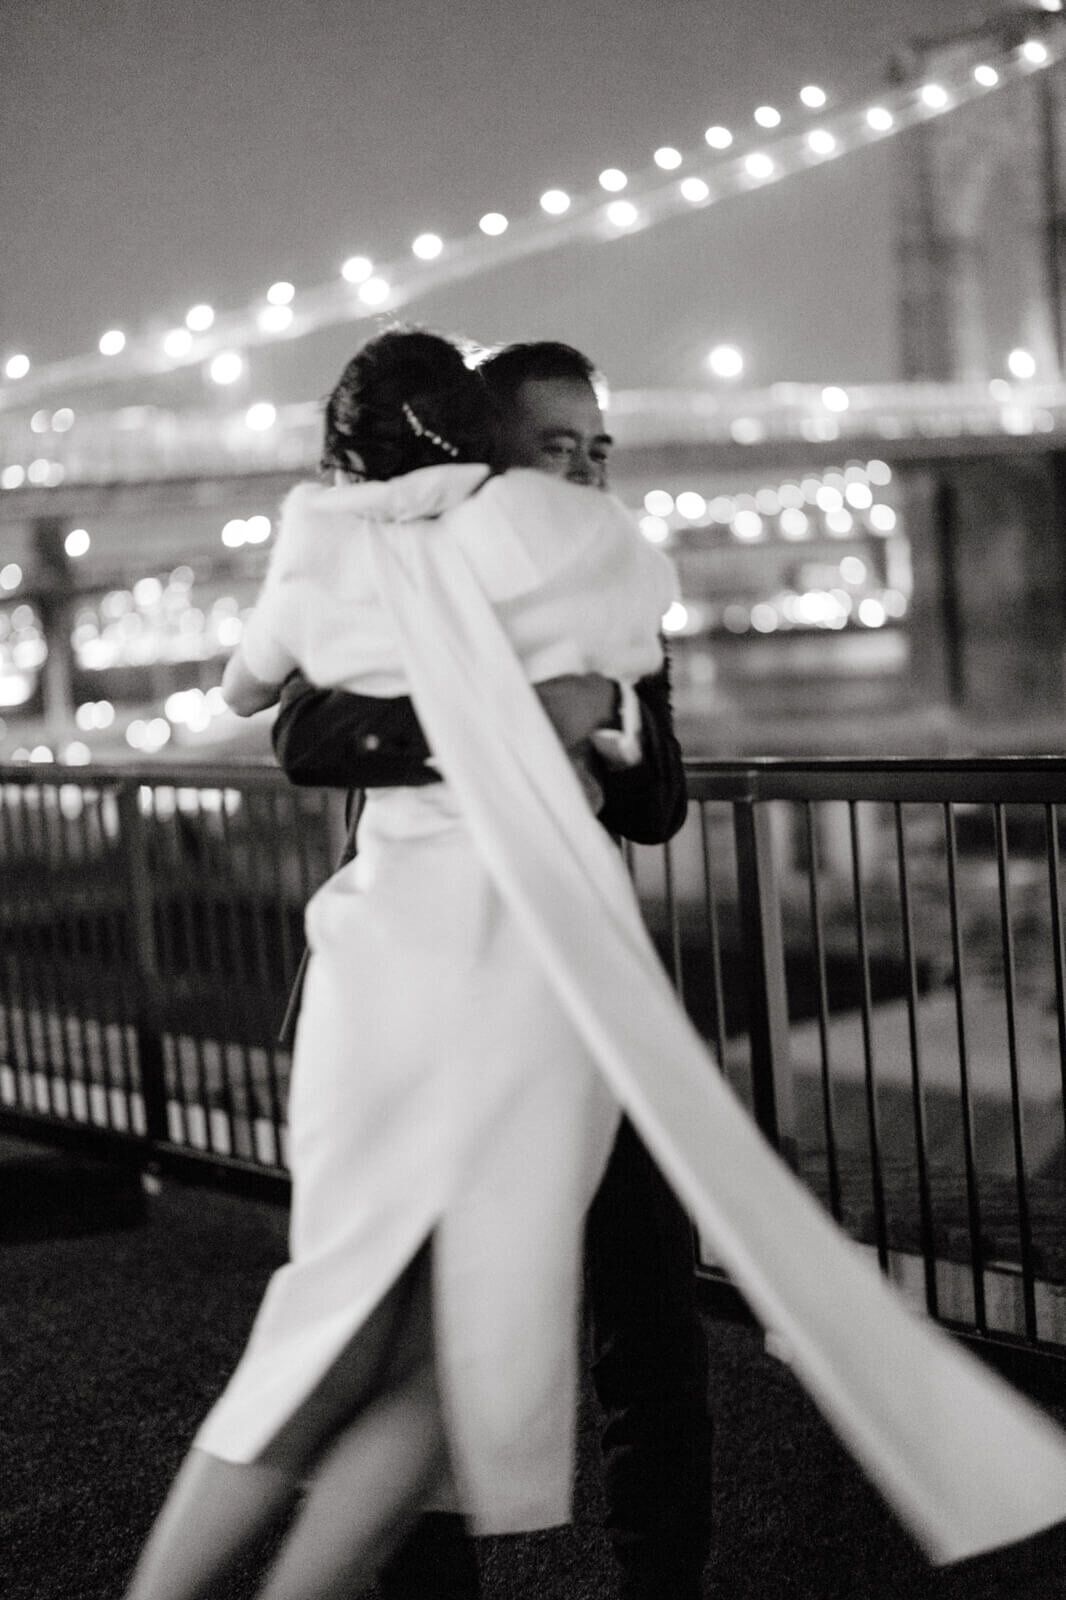 Back view of the bride while hugging the groom on a veranda overlooking the Brooklyn Bridge.